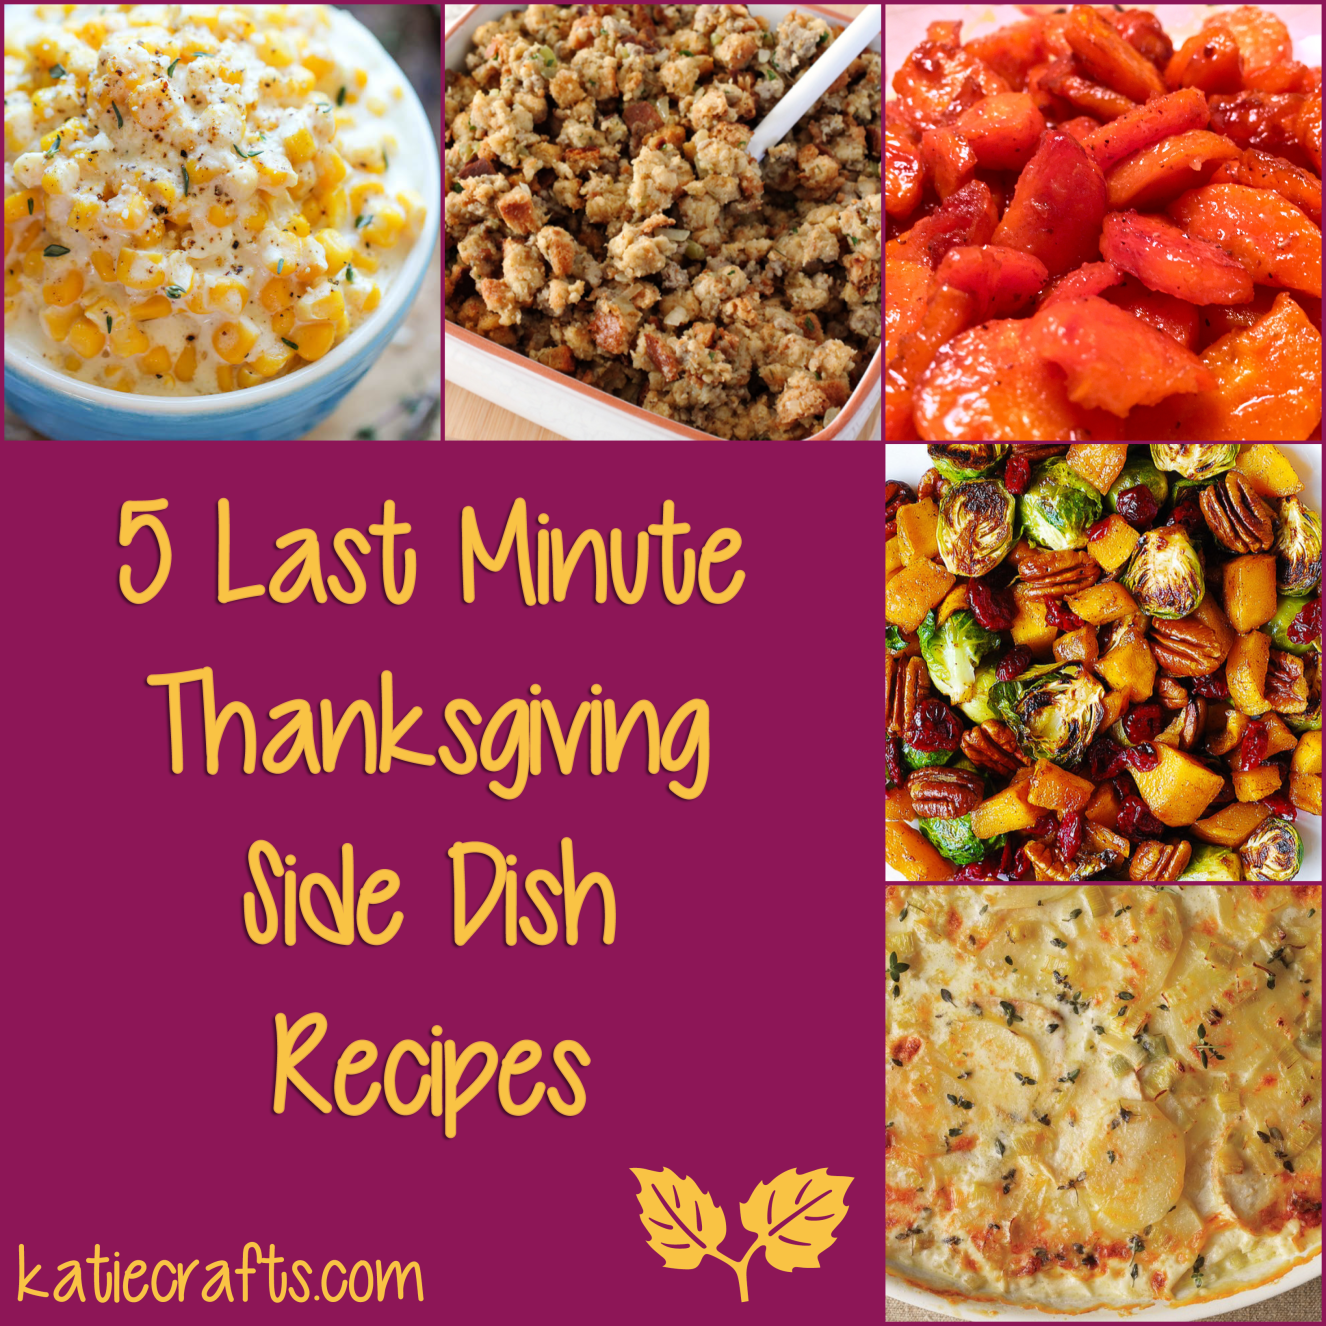 5 Last Minute Thanksgiving Side Dishes Recipes on Katie Crafts; https://www.katiecrafts.com